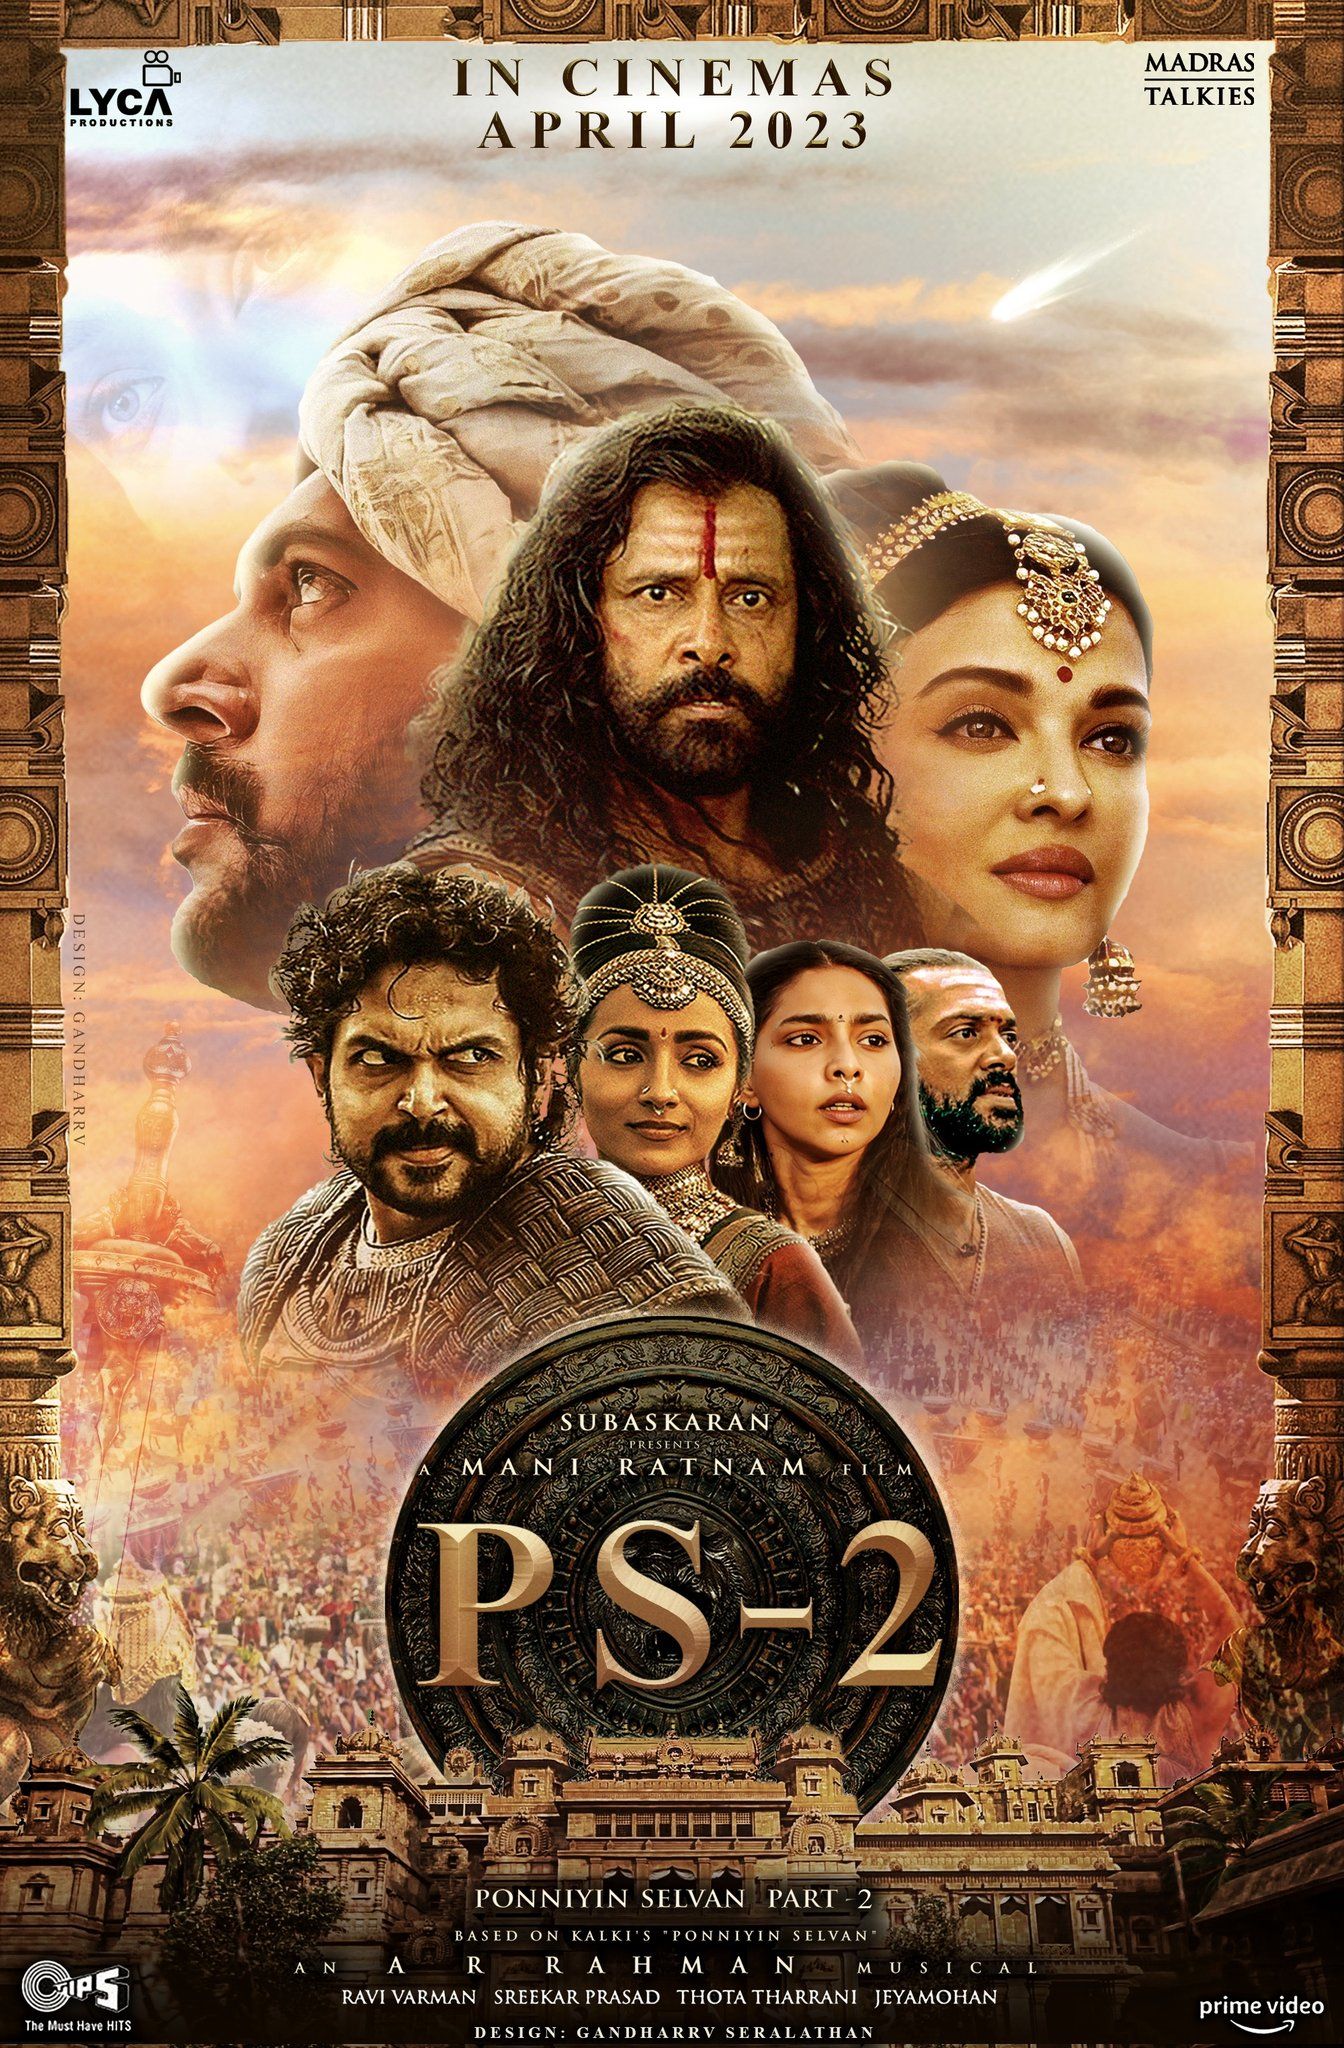 Ponniyin Selvan: Part Two 2023 Hindi Dubbed 1xBet